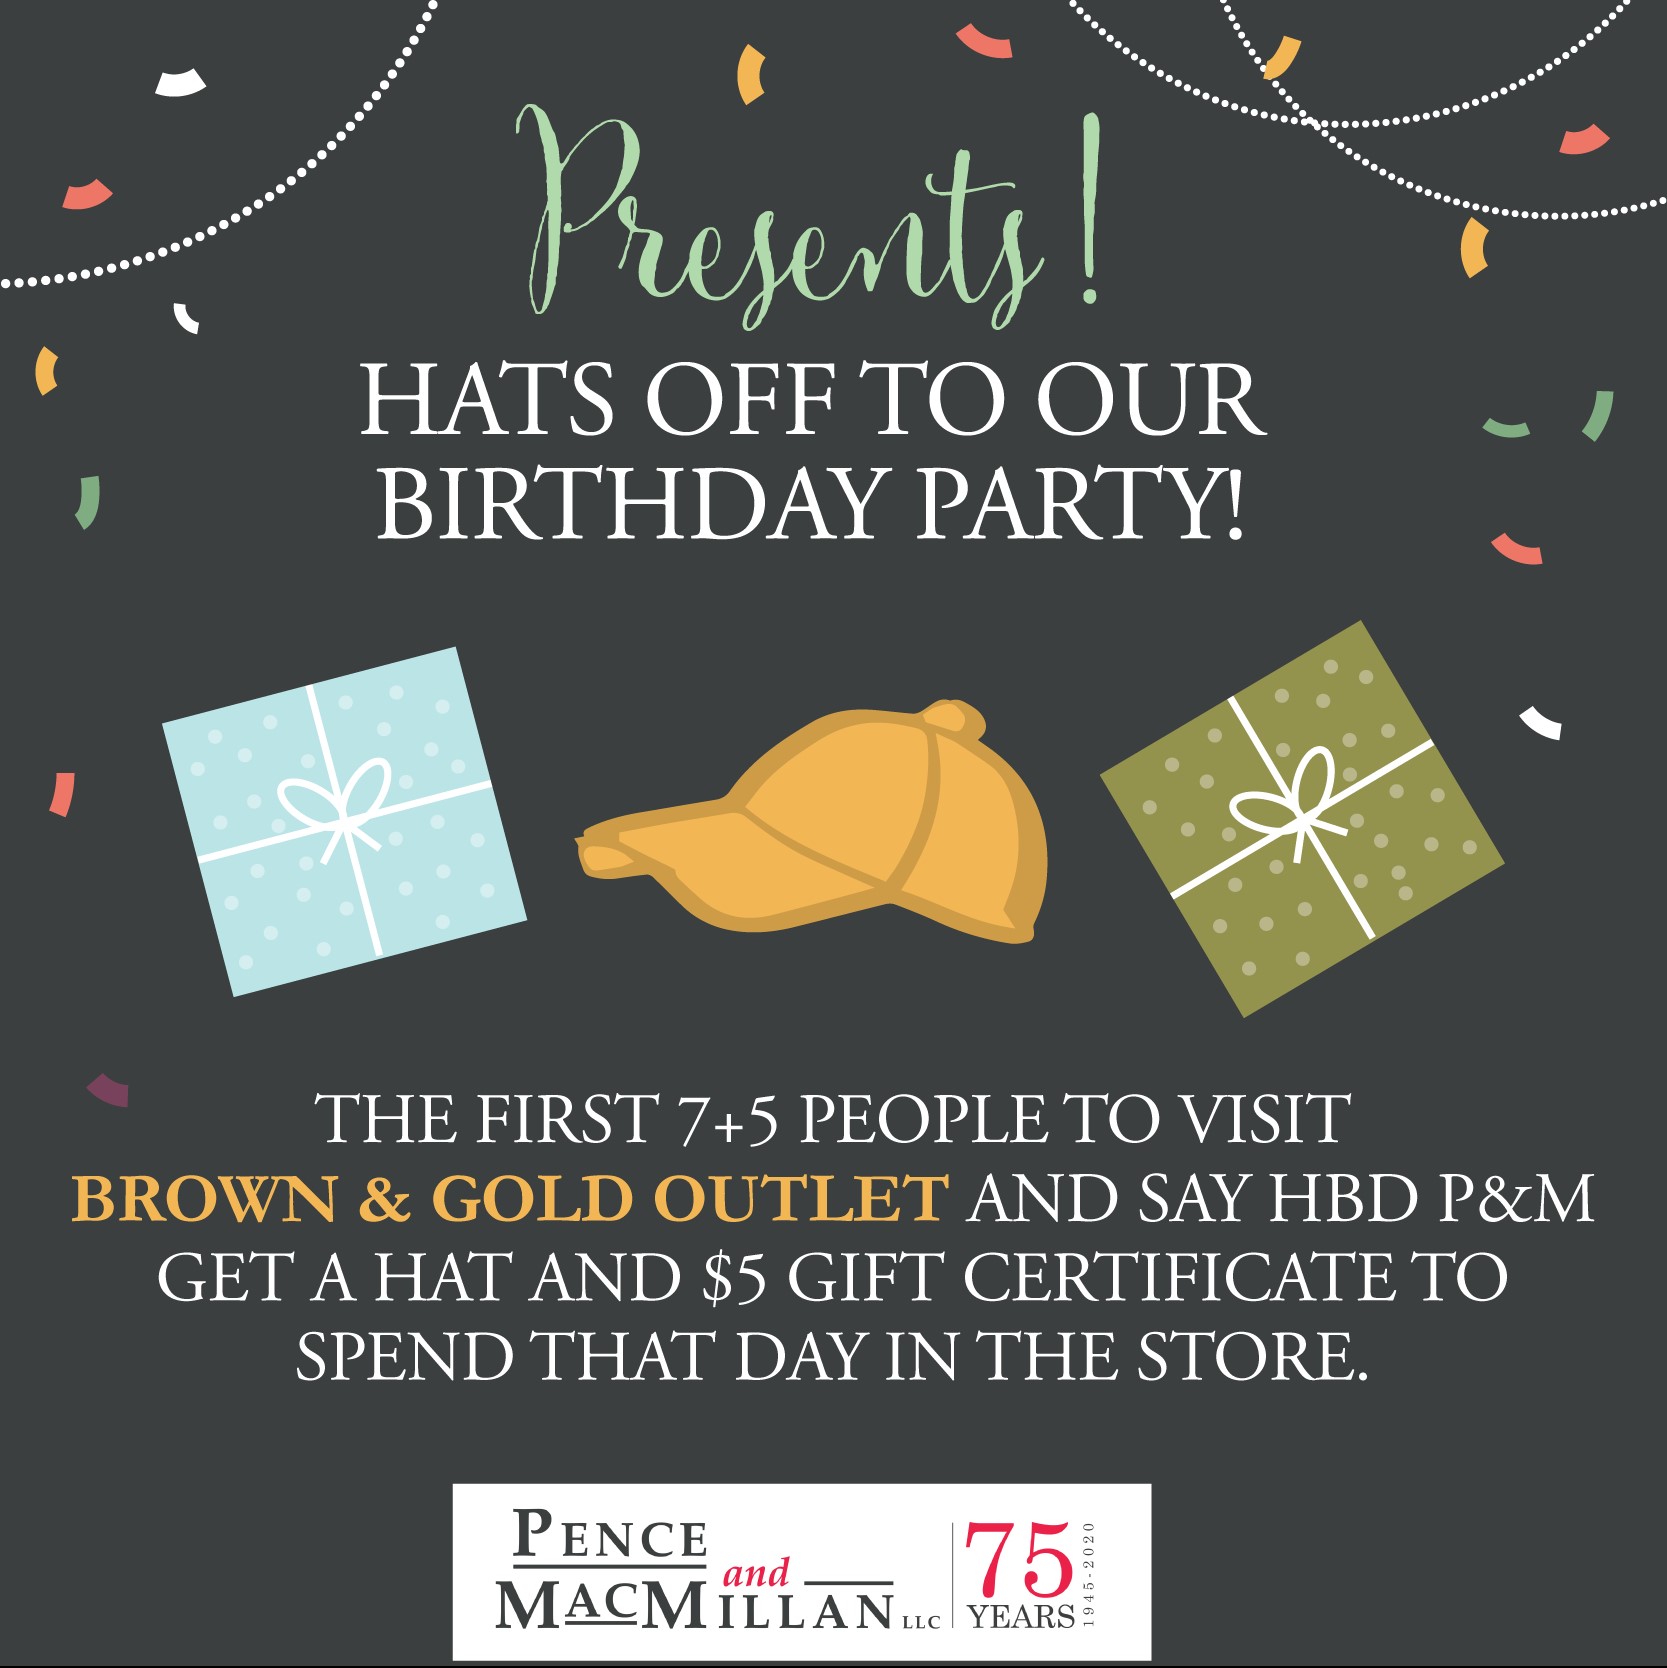 Presents! Hats off to our birthday party! The first 7+5 people to visit Brown & Gold Outlet and say HBD P&M get a hat and $5 gift certificate to spend that day in the store.